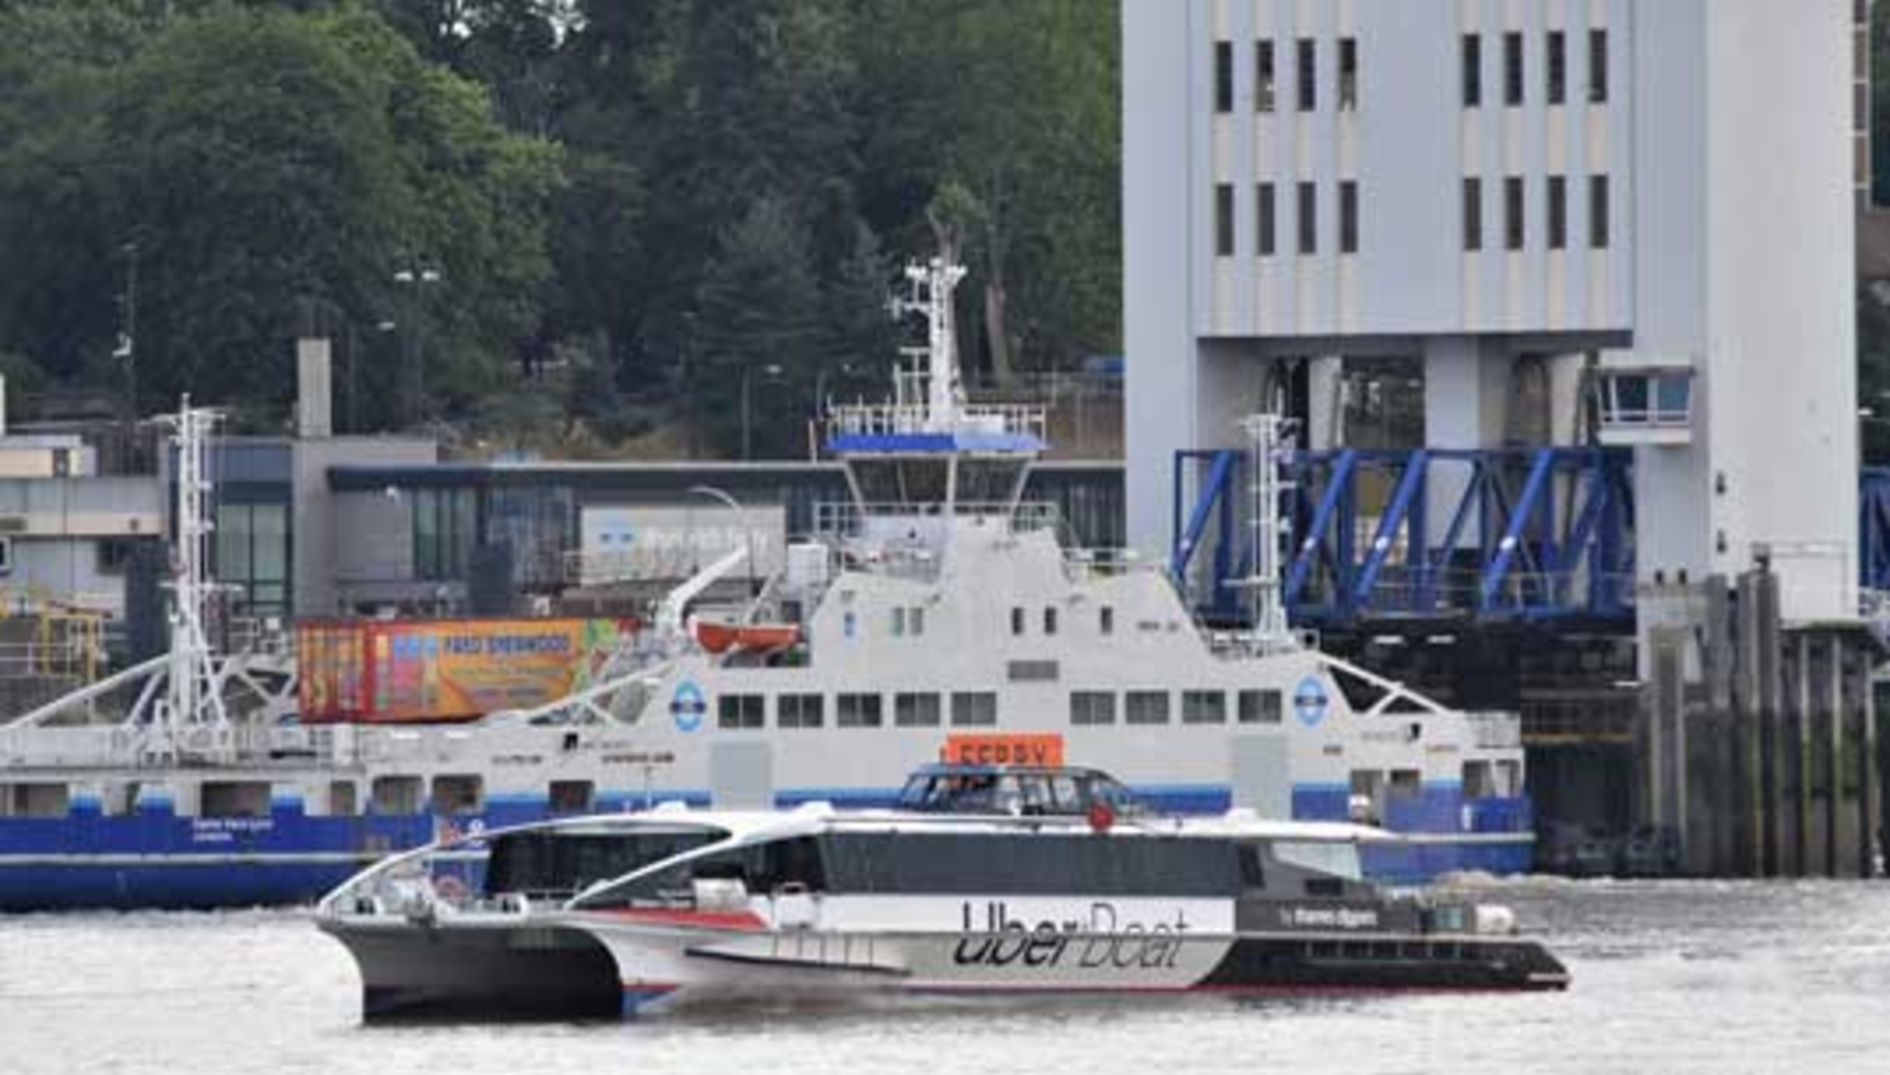 thames clipper prices 2020